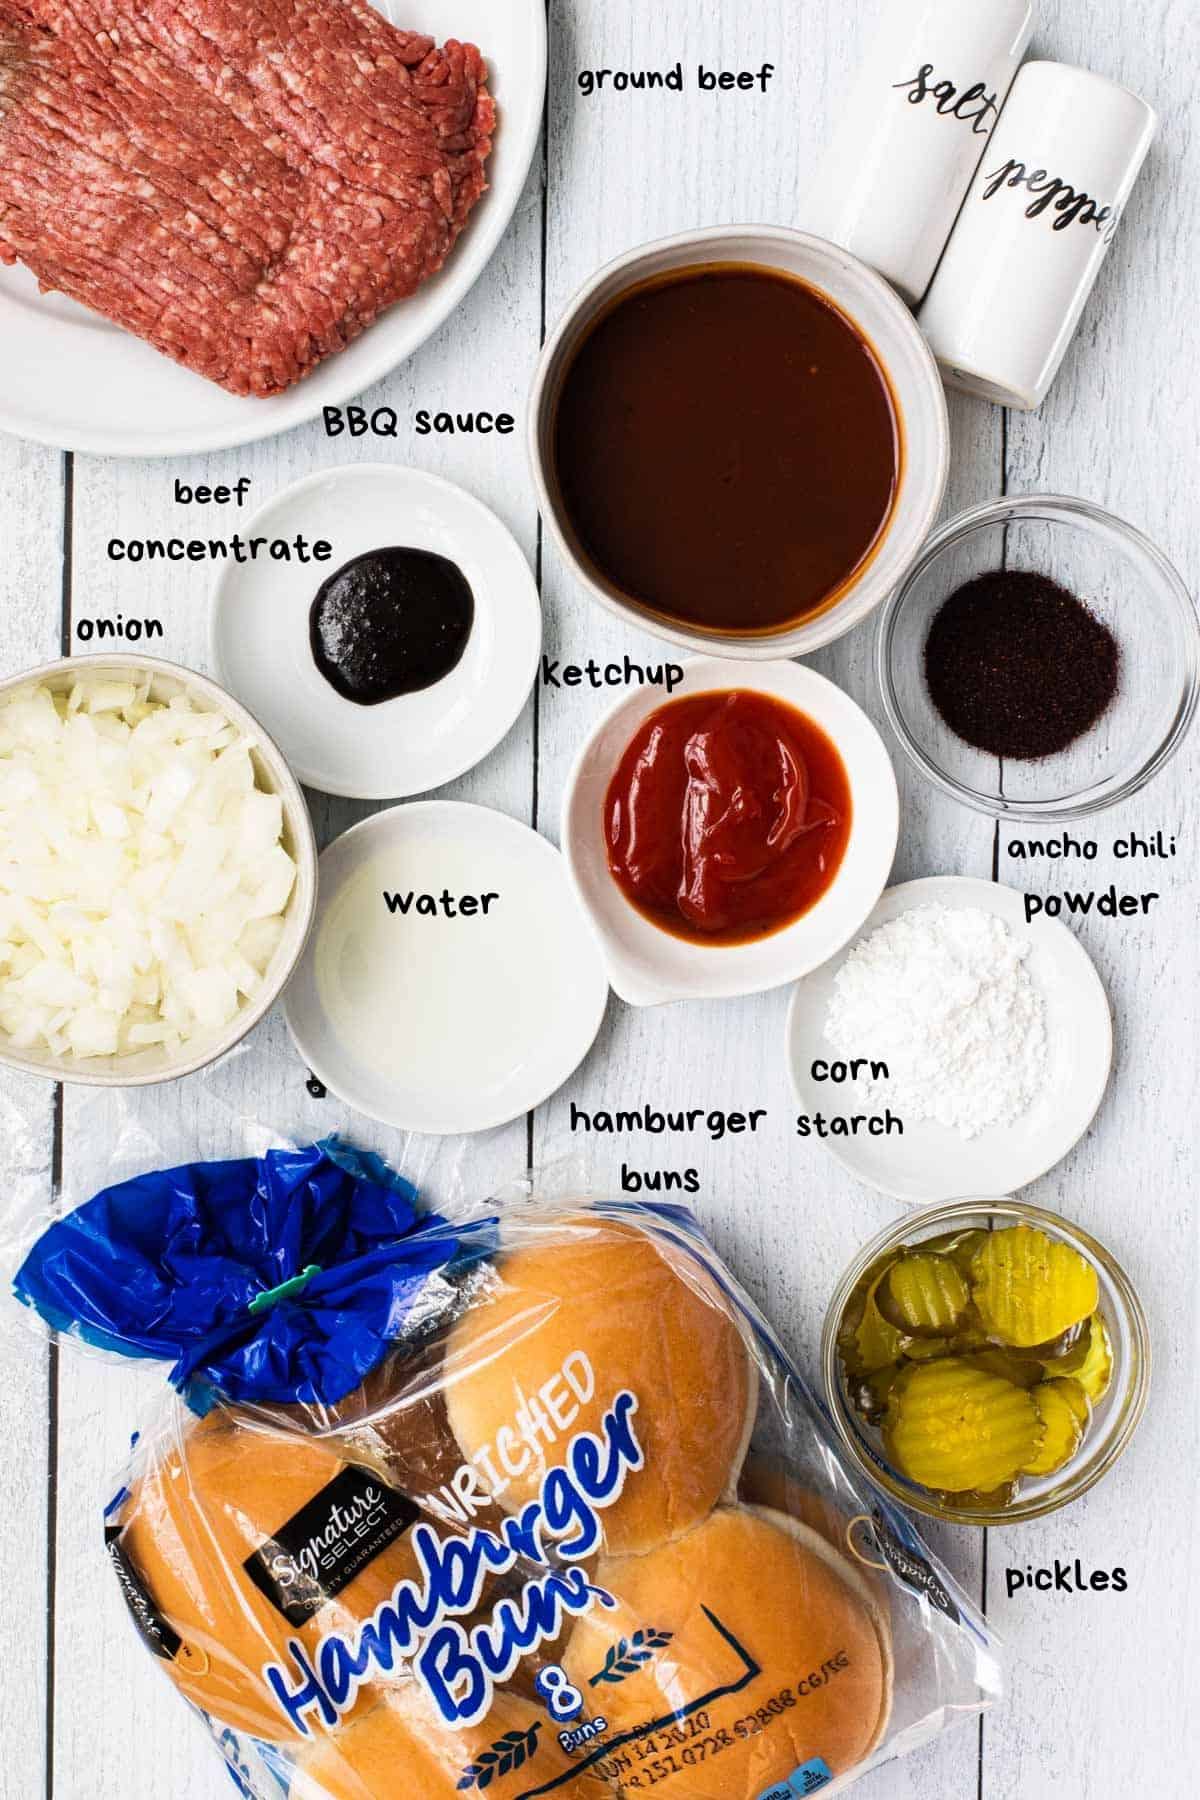 overhead view of ingredients like hanburger buns, ground beef, and bbq sauce